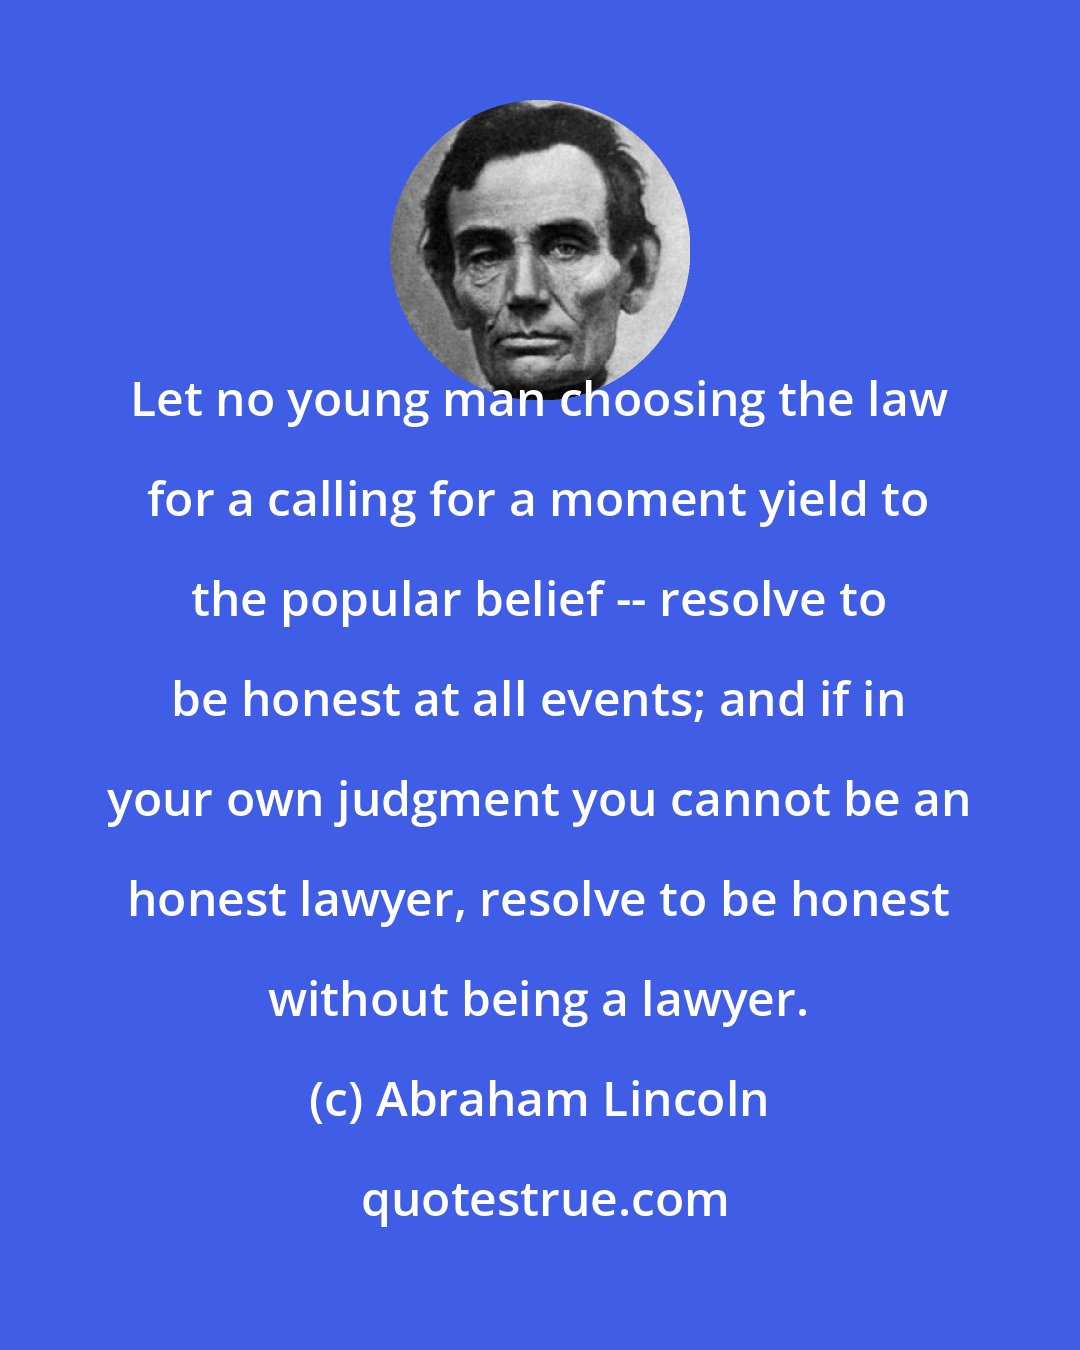 Abraham Lincoln: Let no young man choosing the law for a calling for a moment yield to the popular belief -- resolve to be honest at all events; and if in your own judgment you cannot be an honest lawyer, resolve to be honest without being a lawyer.